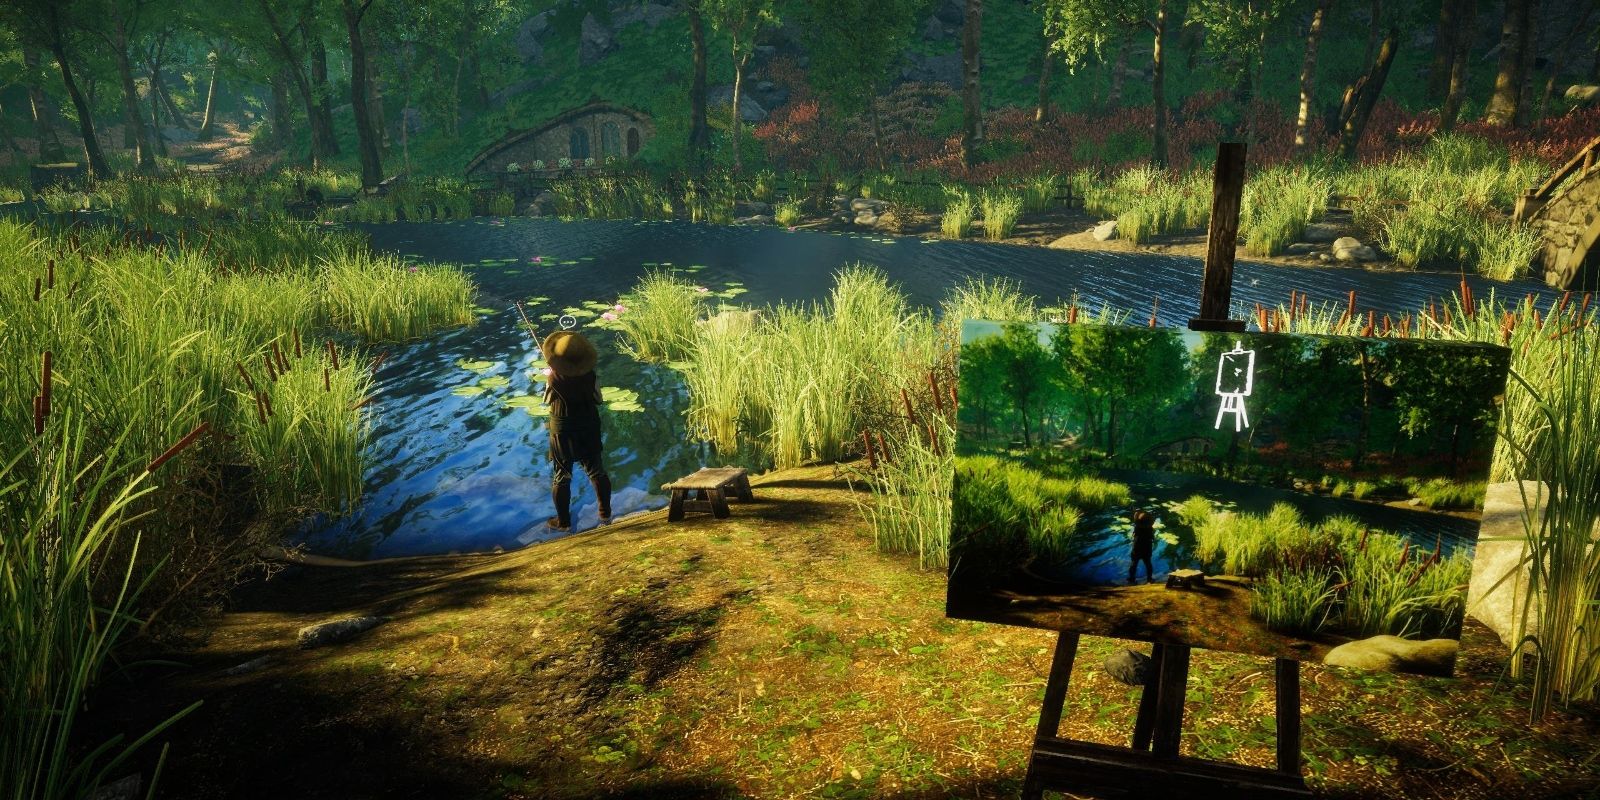 eastshade painting a landscape